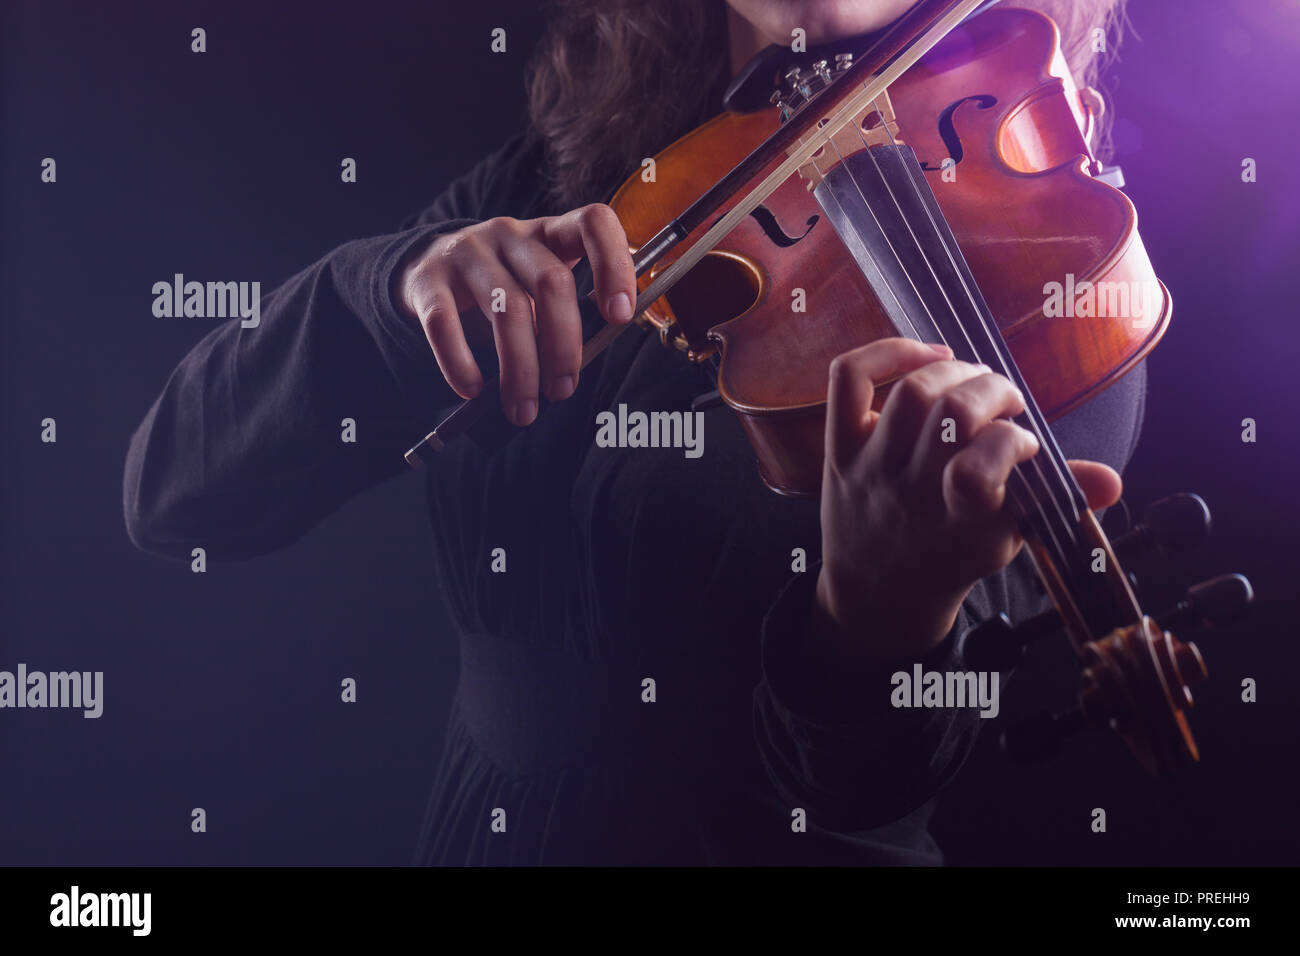 Young girl playing the violin on dark background Stock Photo